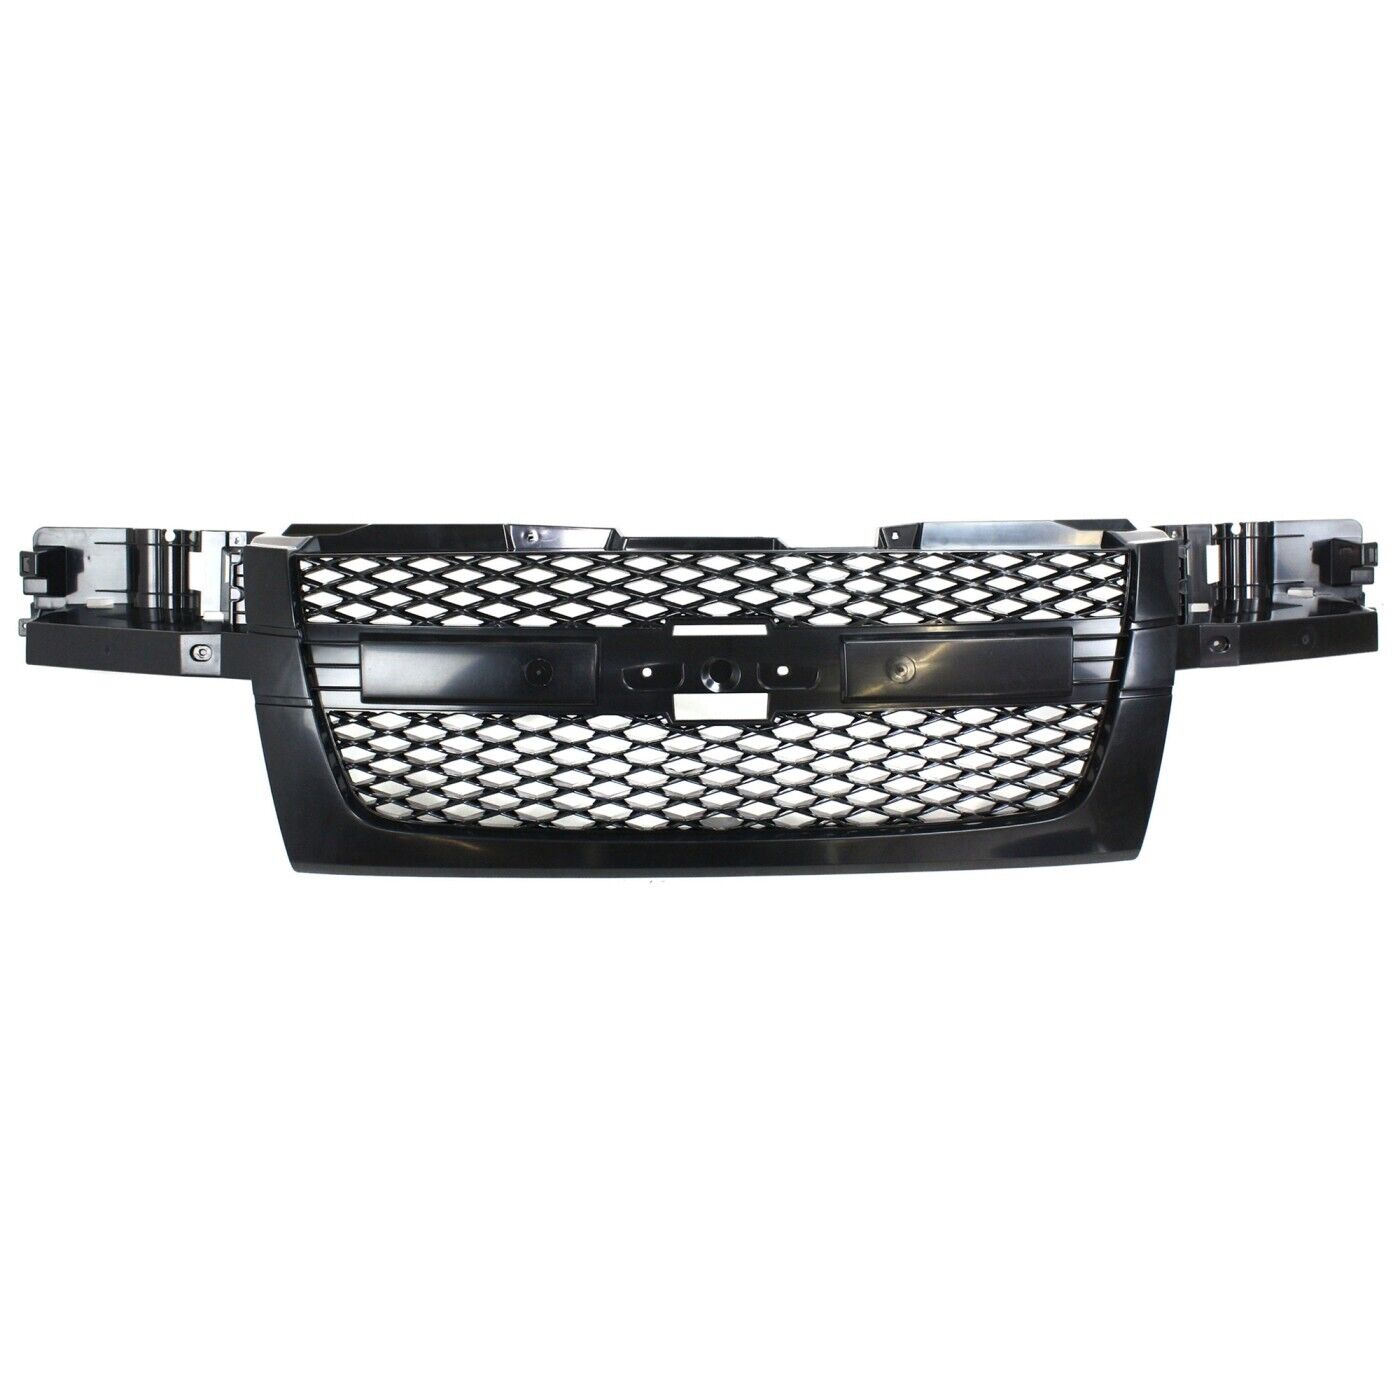 Grille Assembly For 2004-2012 Chevrolet Colorado With Emblem Provision Dark Gray